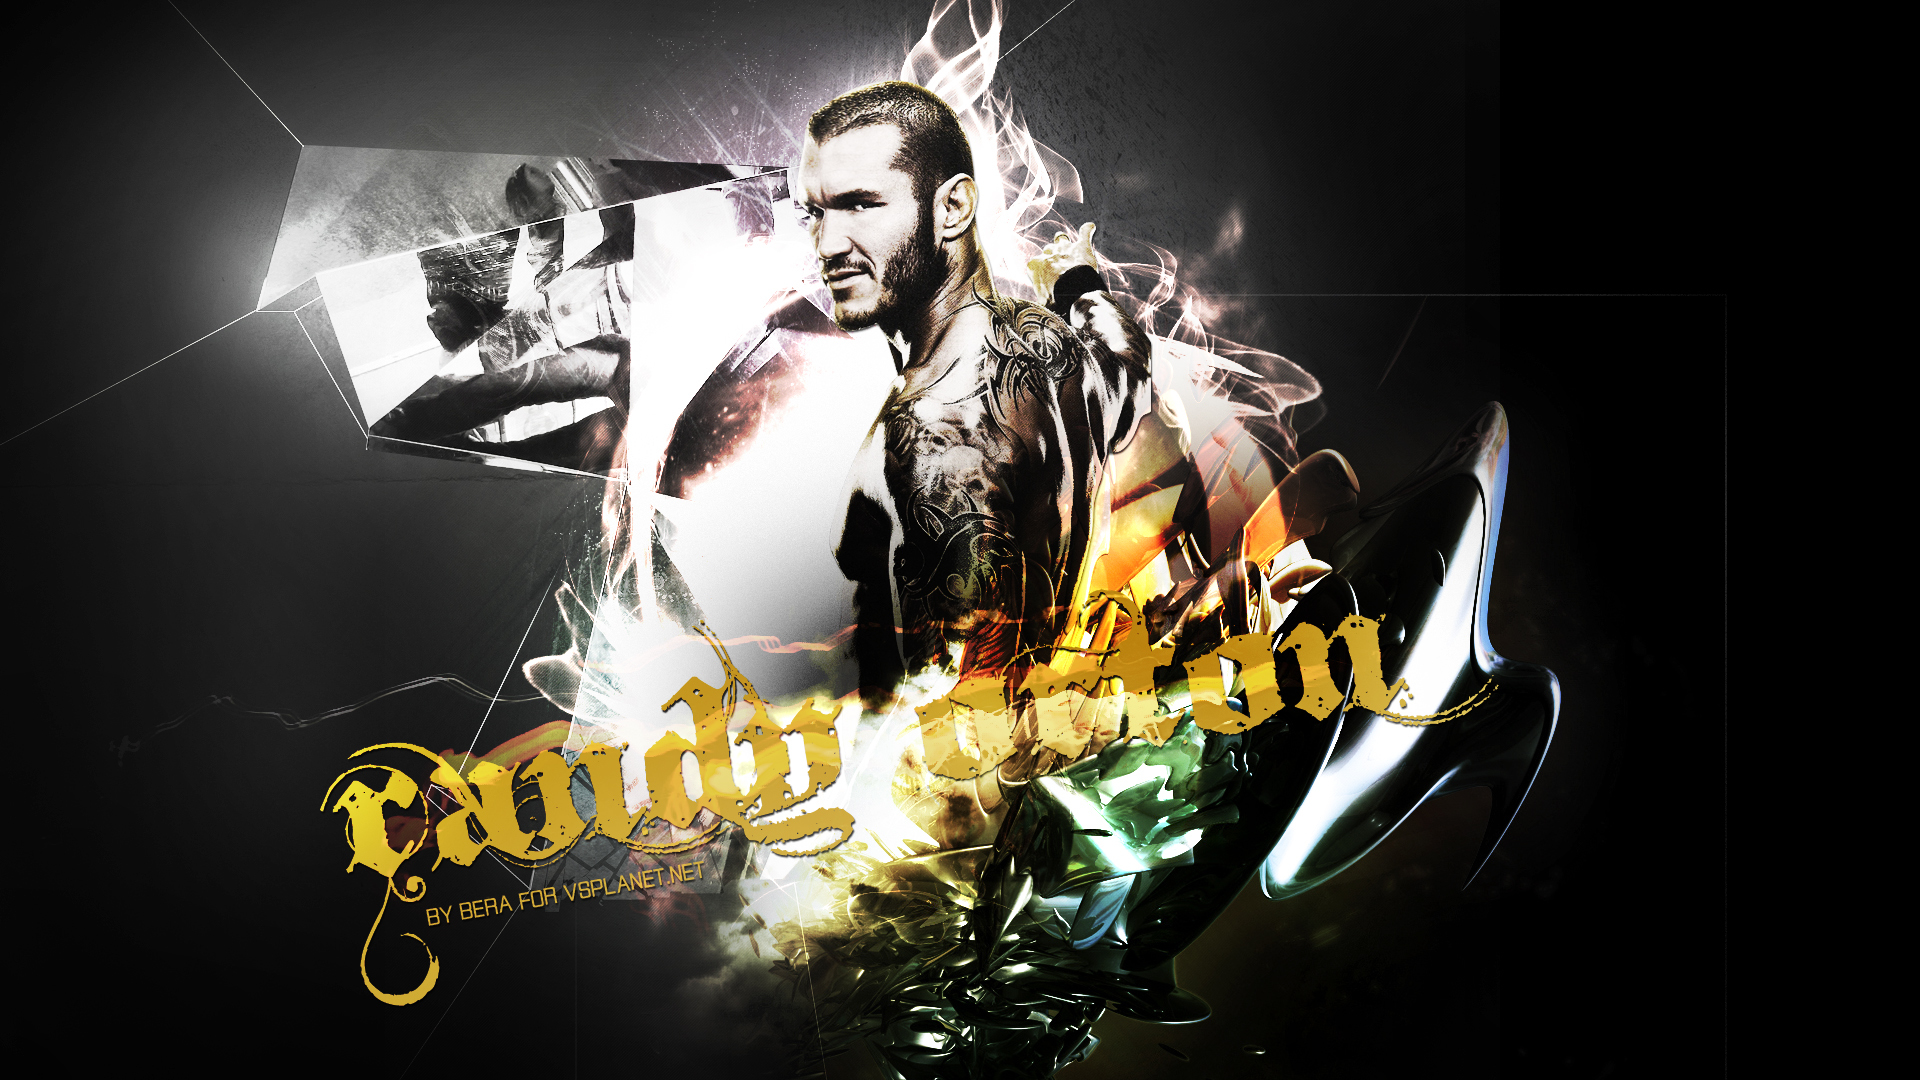 Randy Orton Wallpapers Images Photos Pictures Backgrounds1920 x 1080